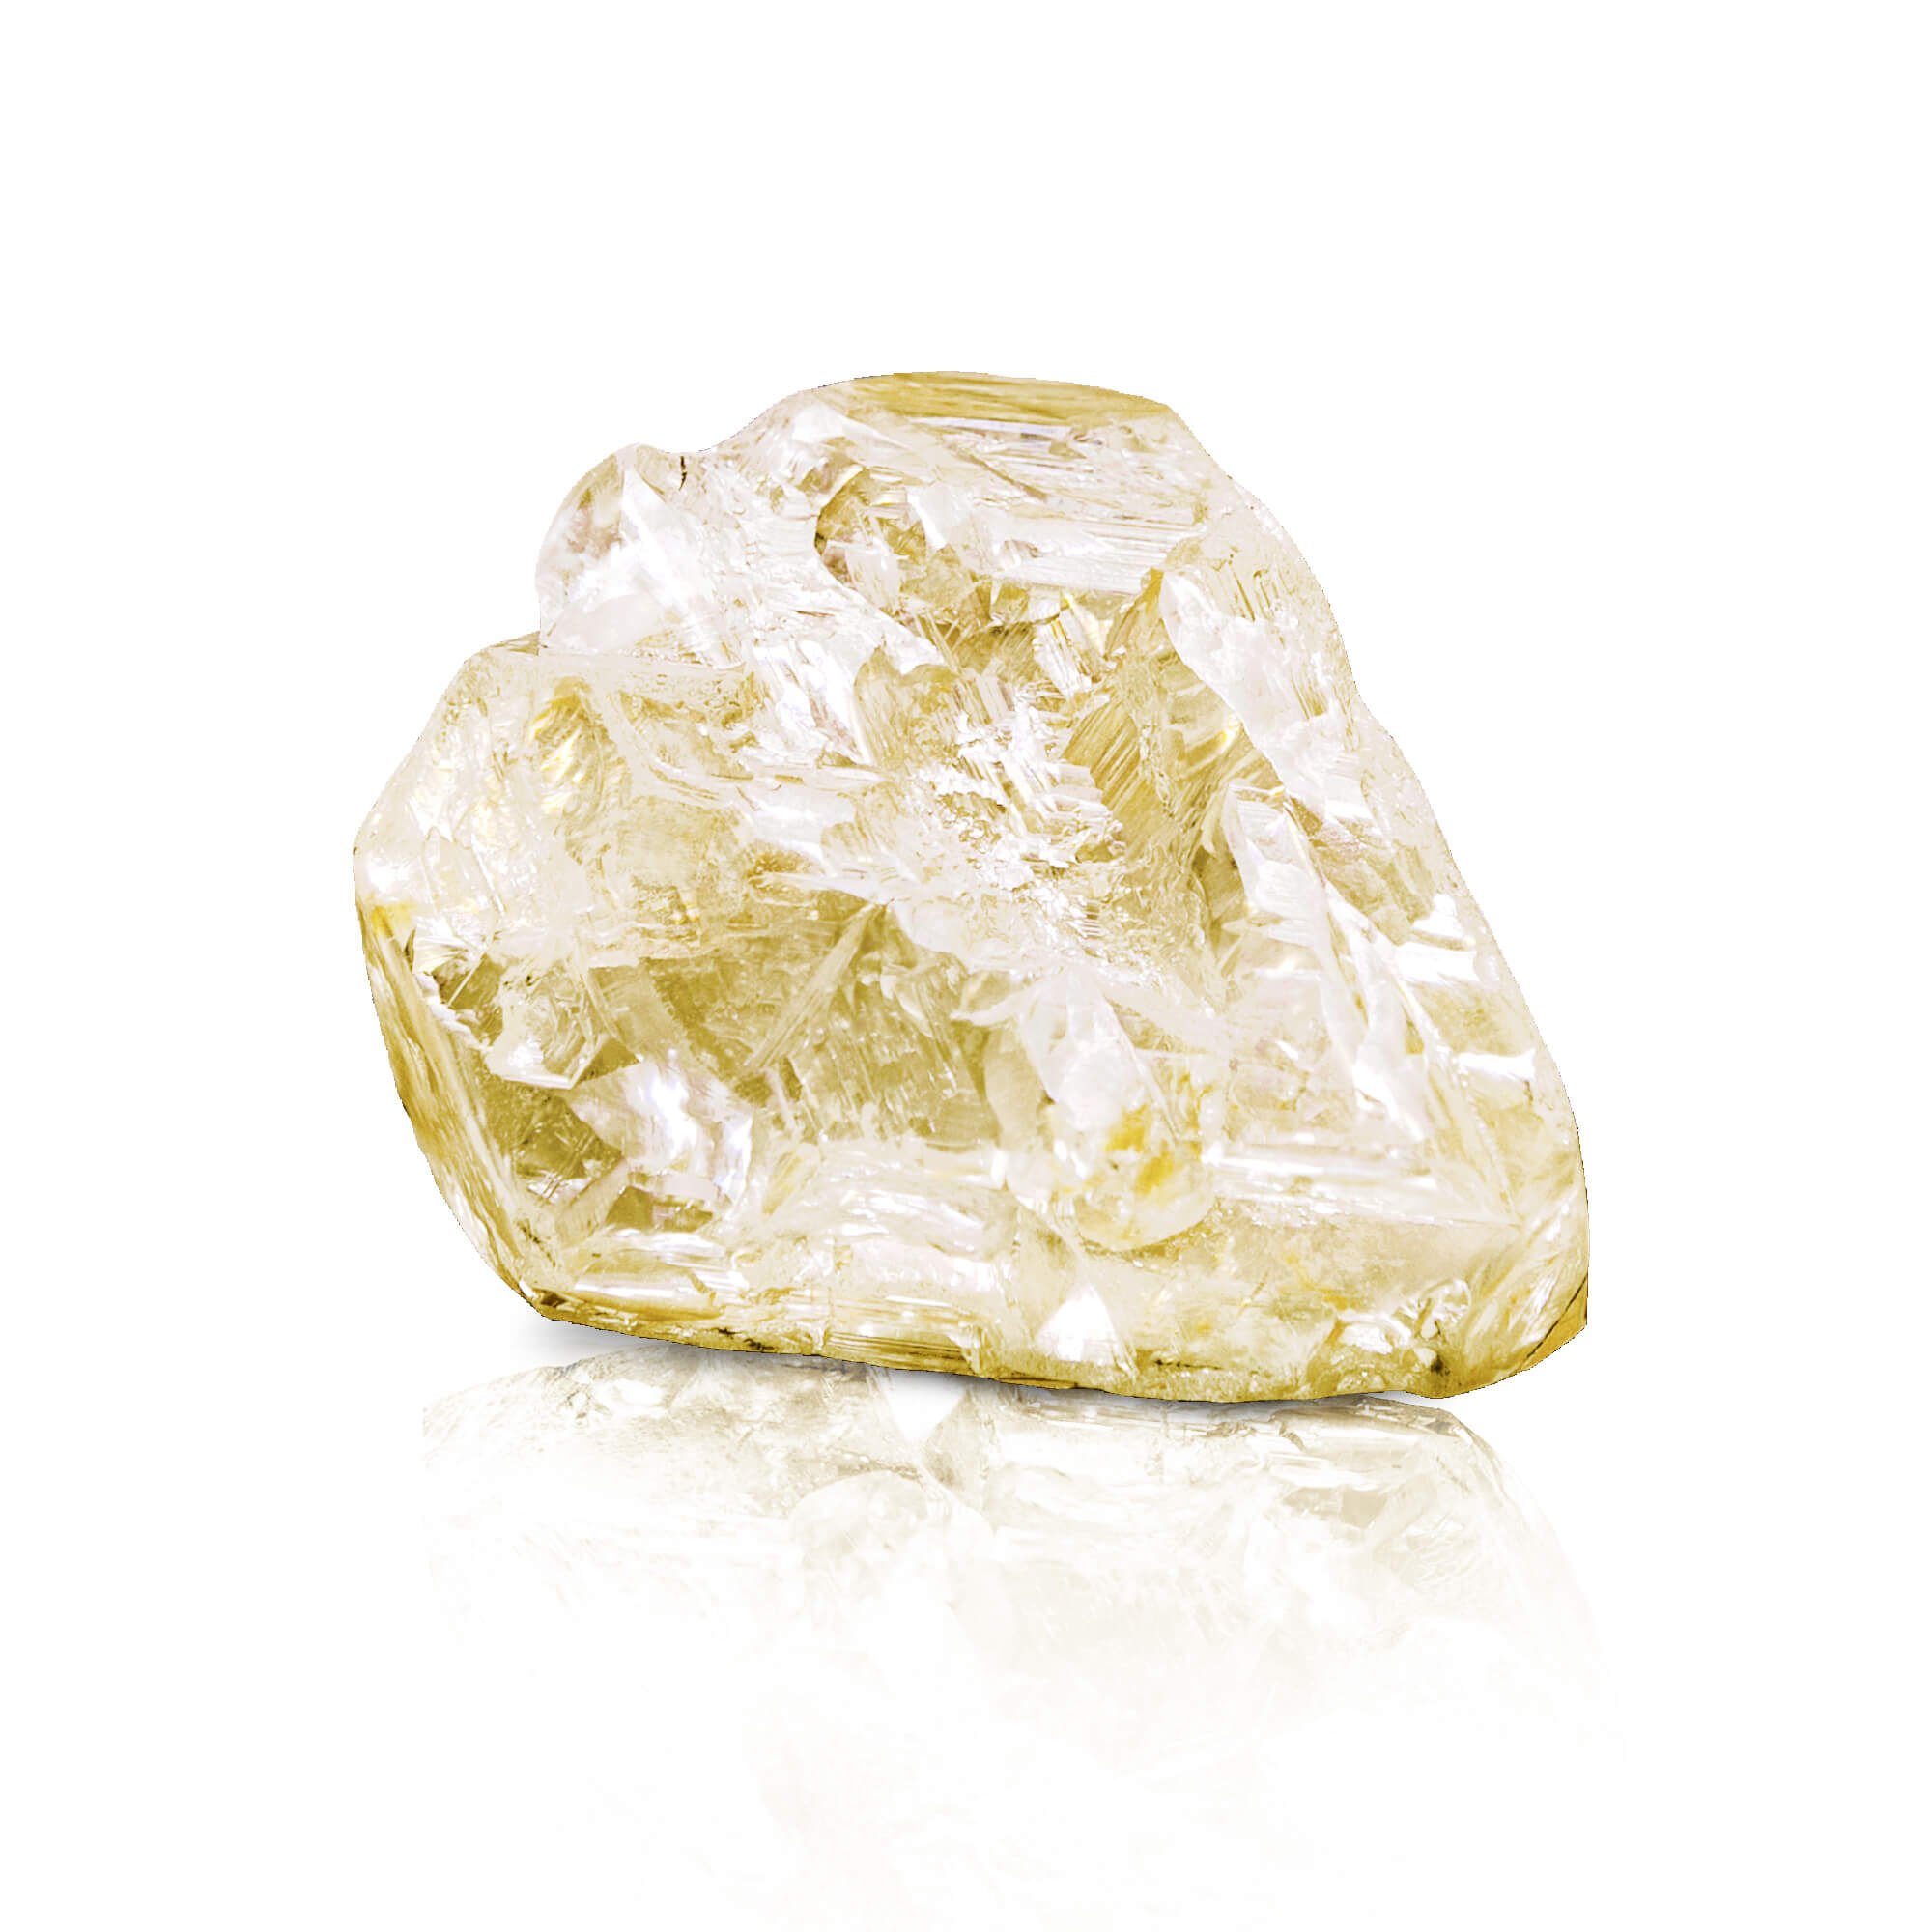 The rough stone of the 709 carat Peace Diamond acquired by Graff